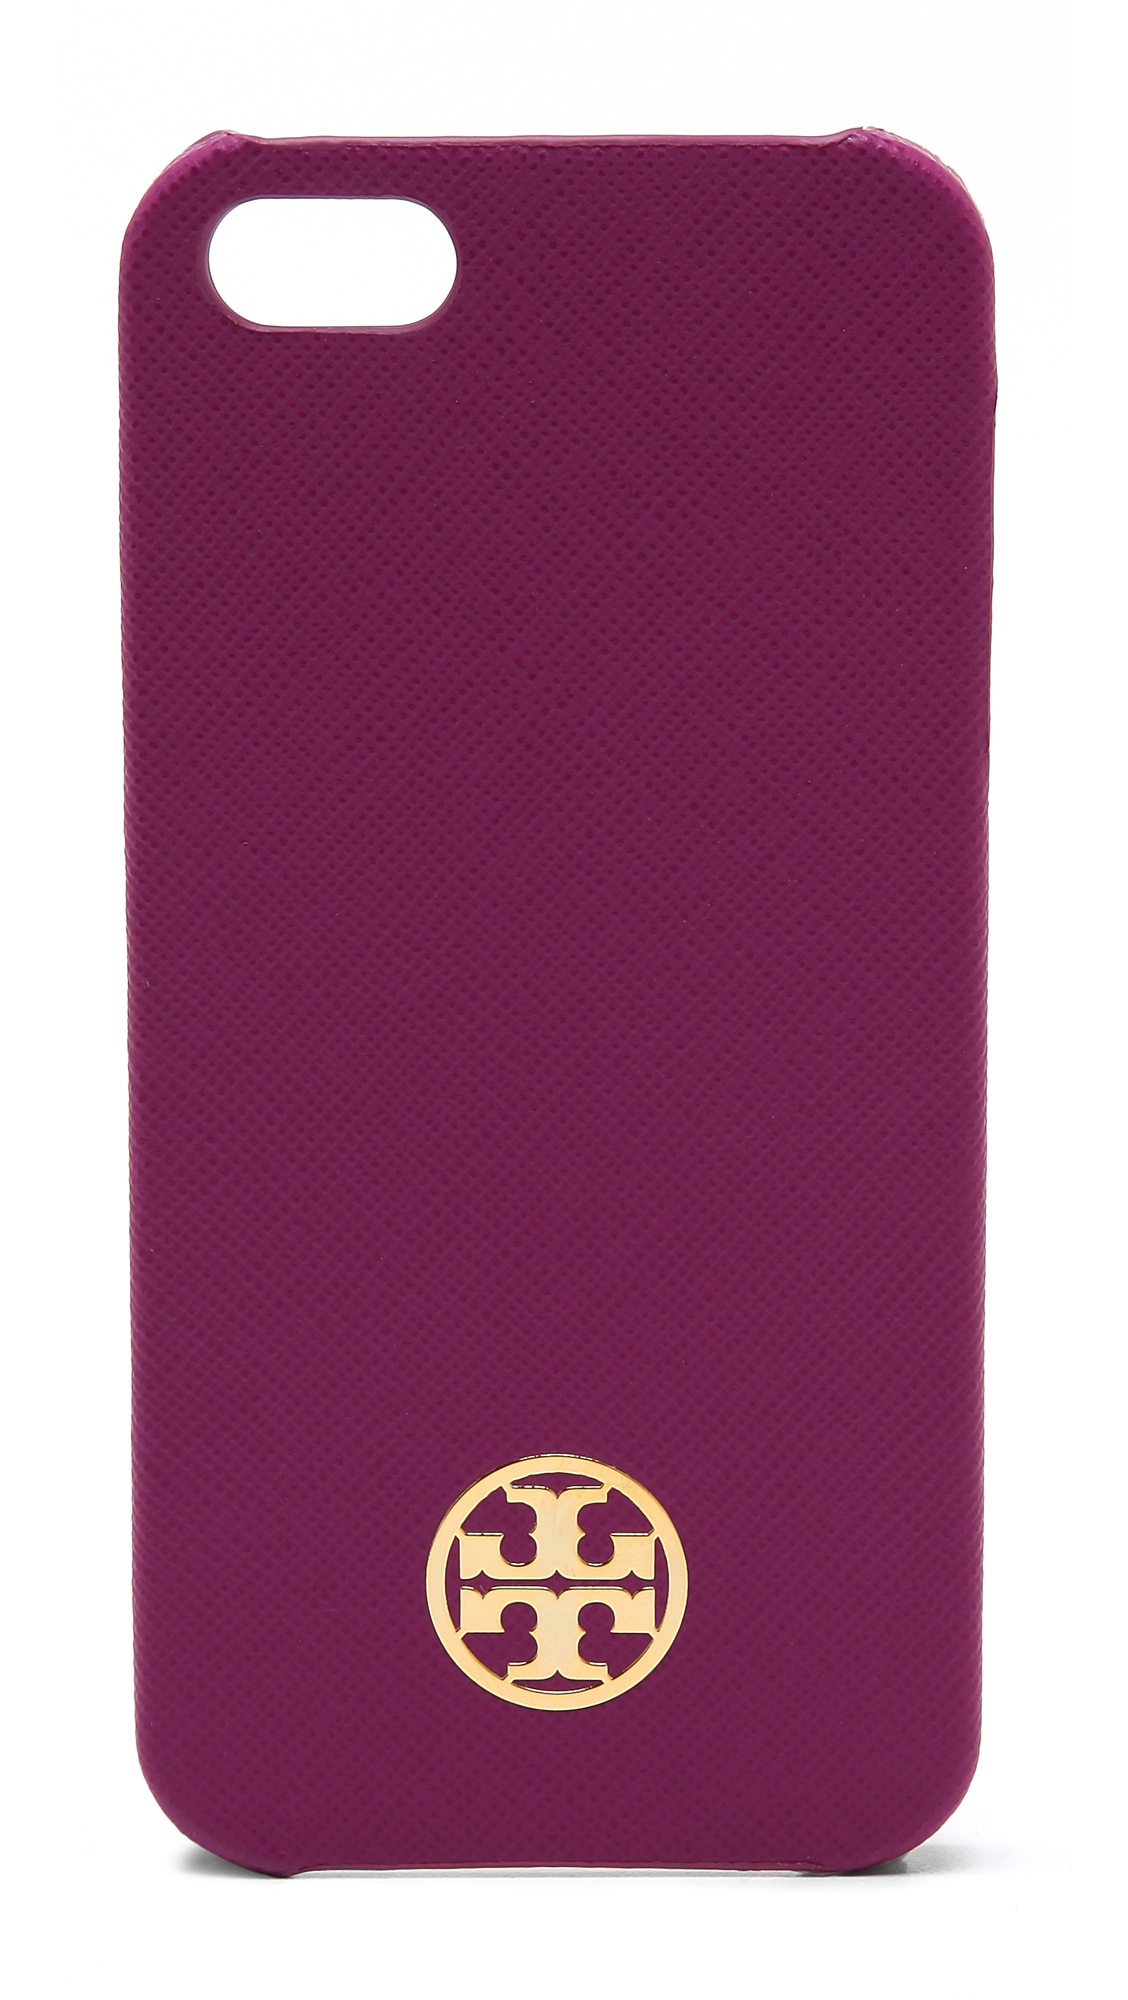 Tory Burch Robinson Leather Hardshell Iphone 5 5s Case in Pink | Lyst